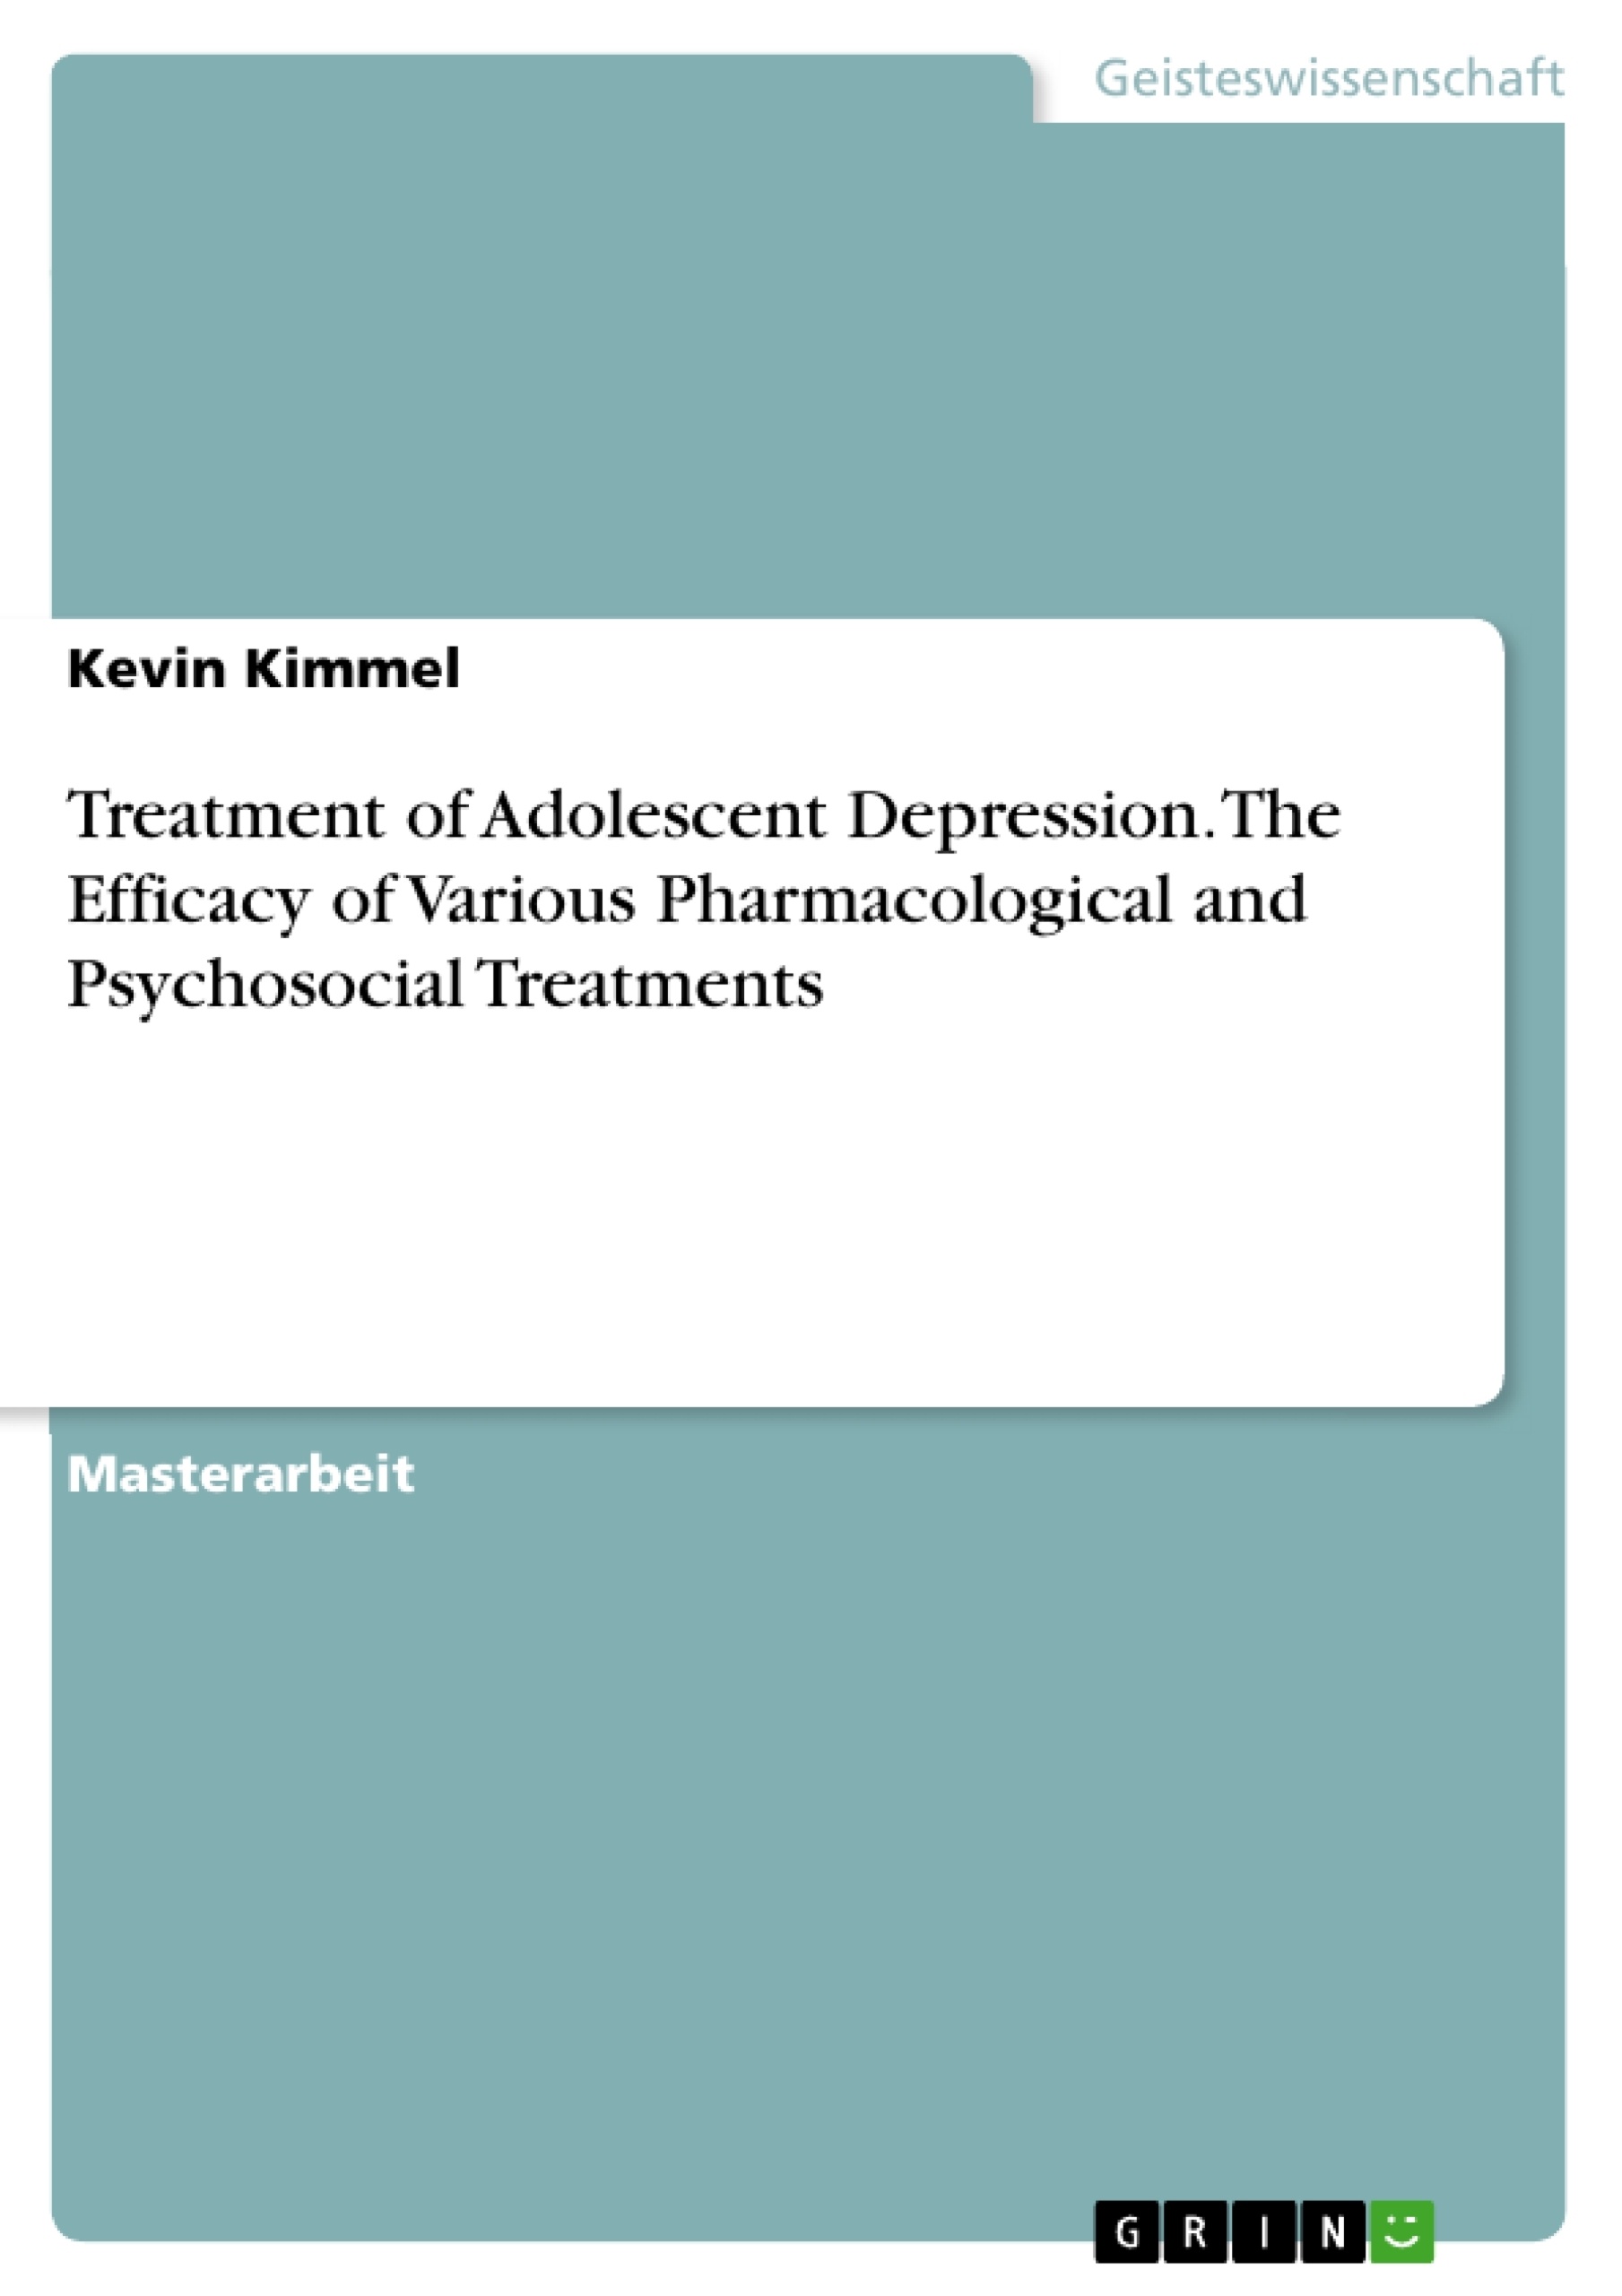 Titel: Treatment of Adolescent Depression. The Efficacy of Various Pharmacological and Psychosocial Treatments